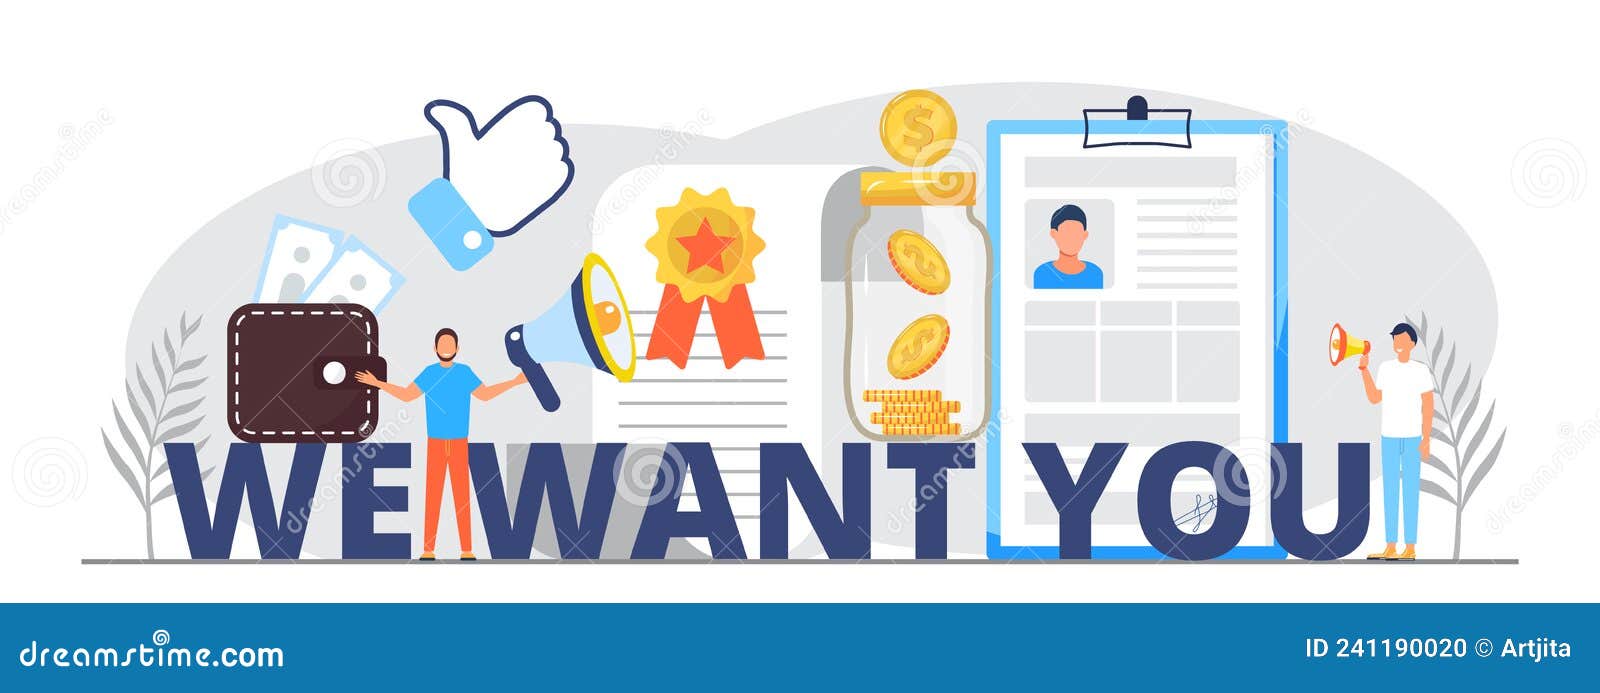 we want you, recruitment concept, great gob  . startup, gob interview online concept with tiny people, big